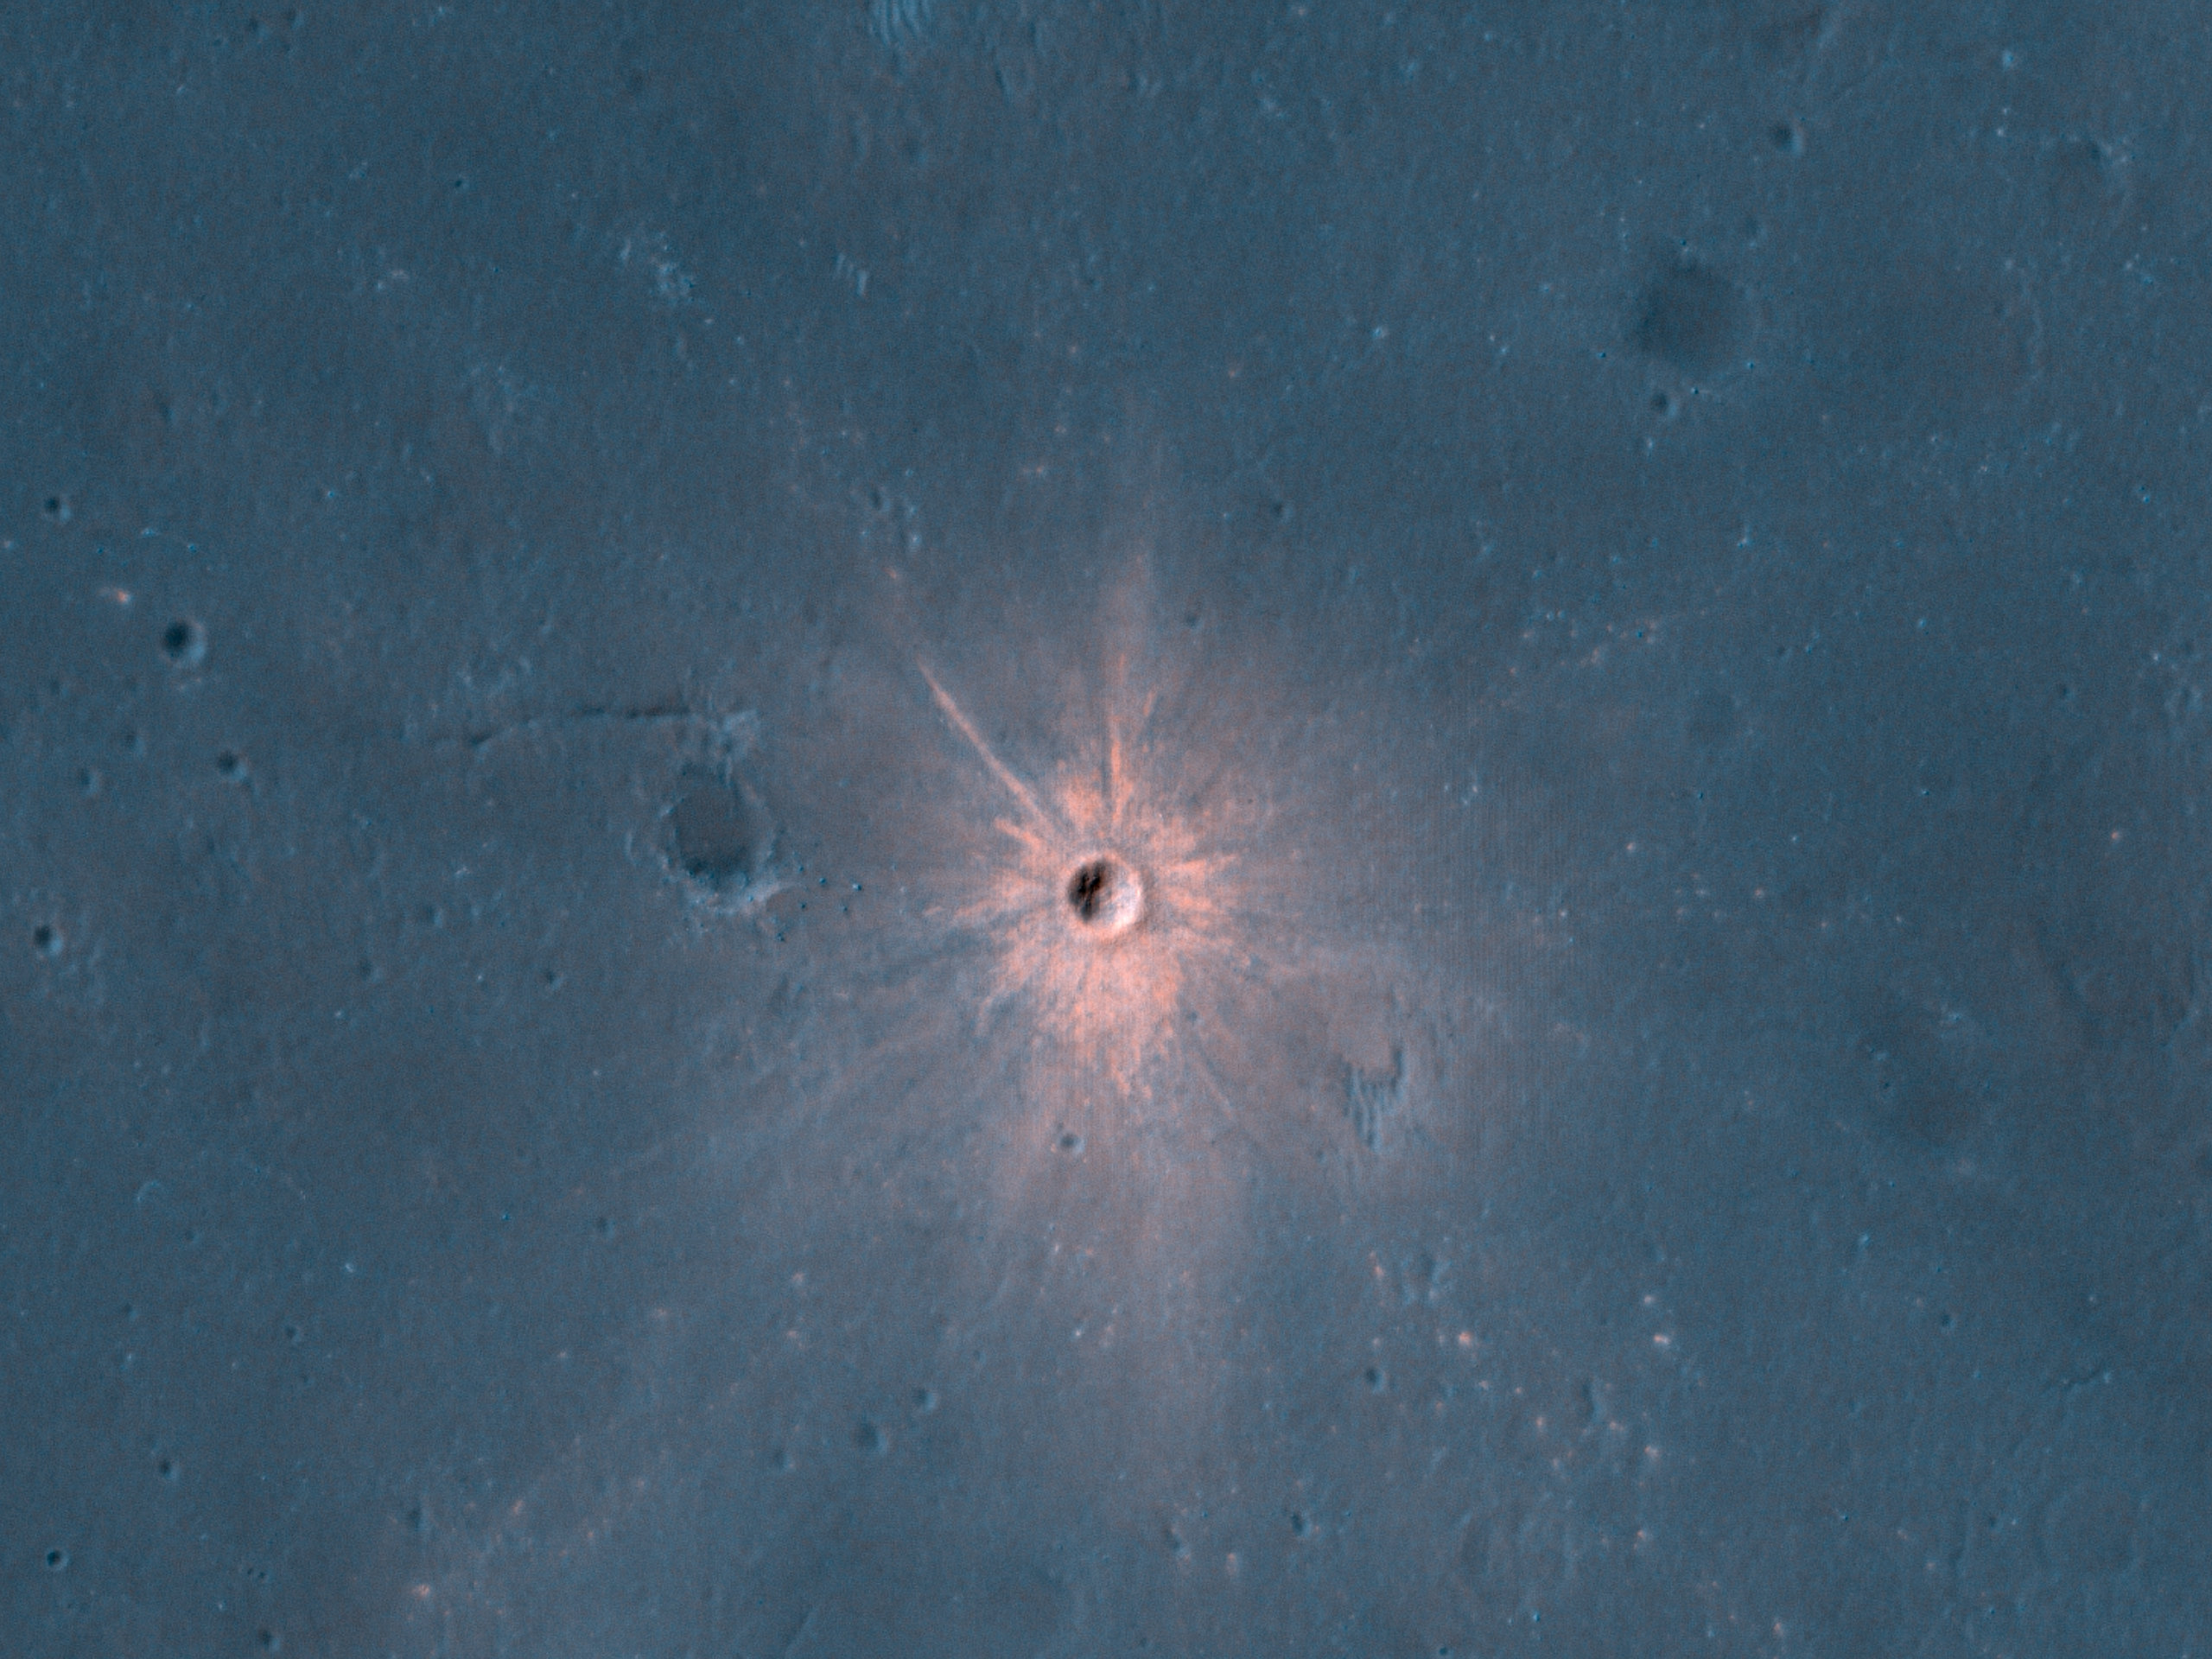 A New Impact Crater with Bright Ejecta